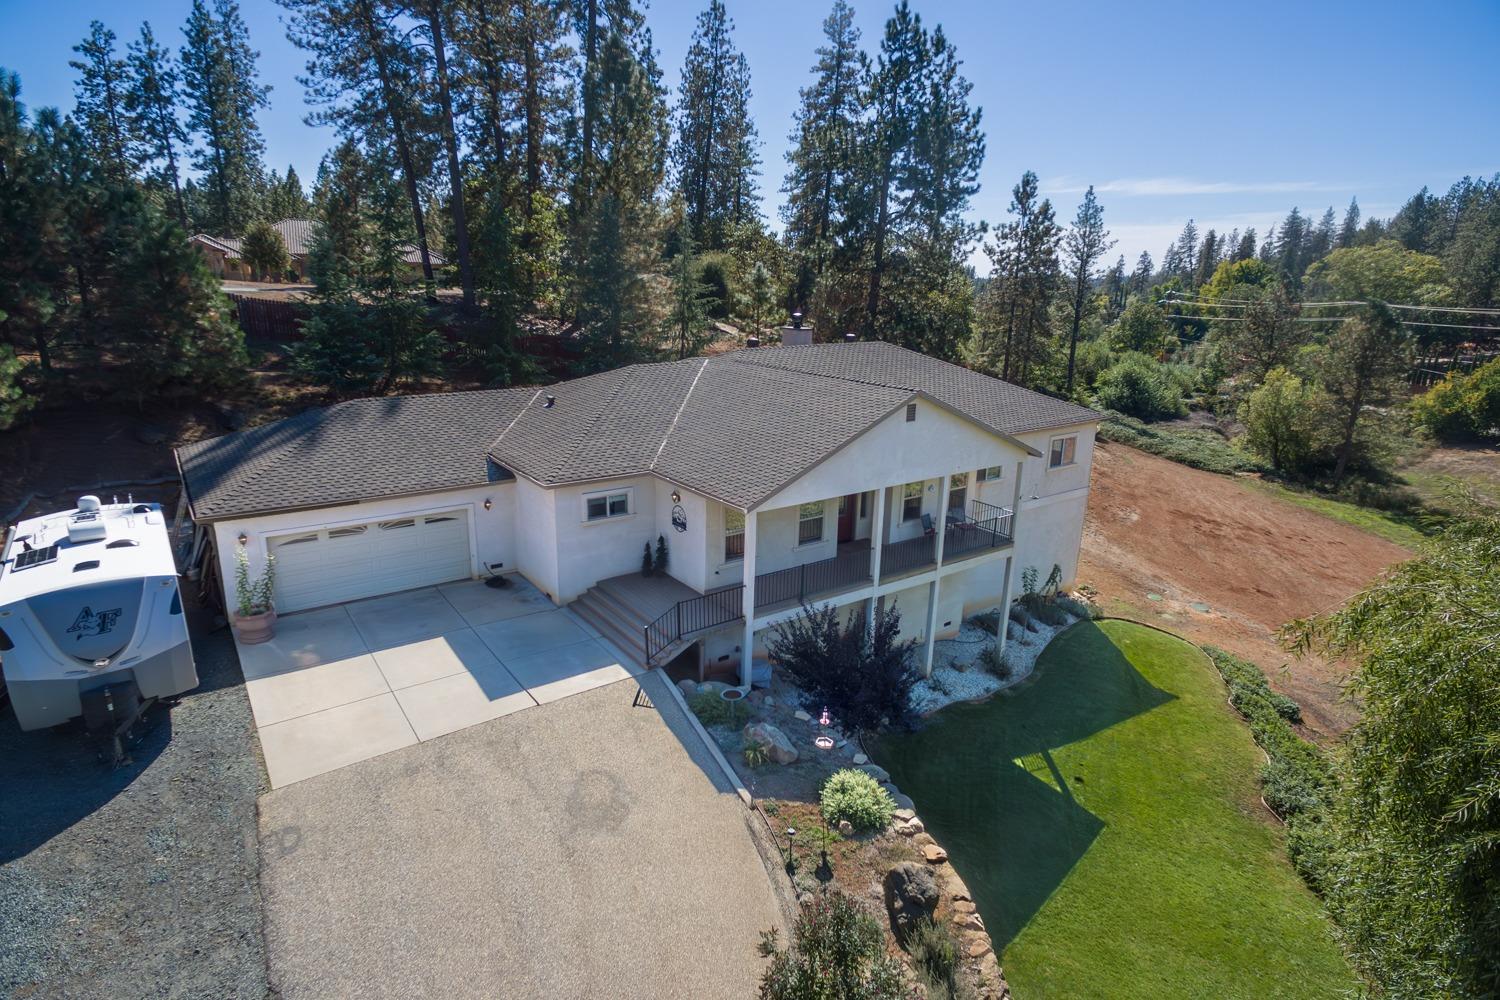 Photo of 22260 Placer Hills Rd in Colfax, CA